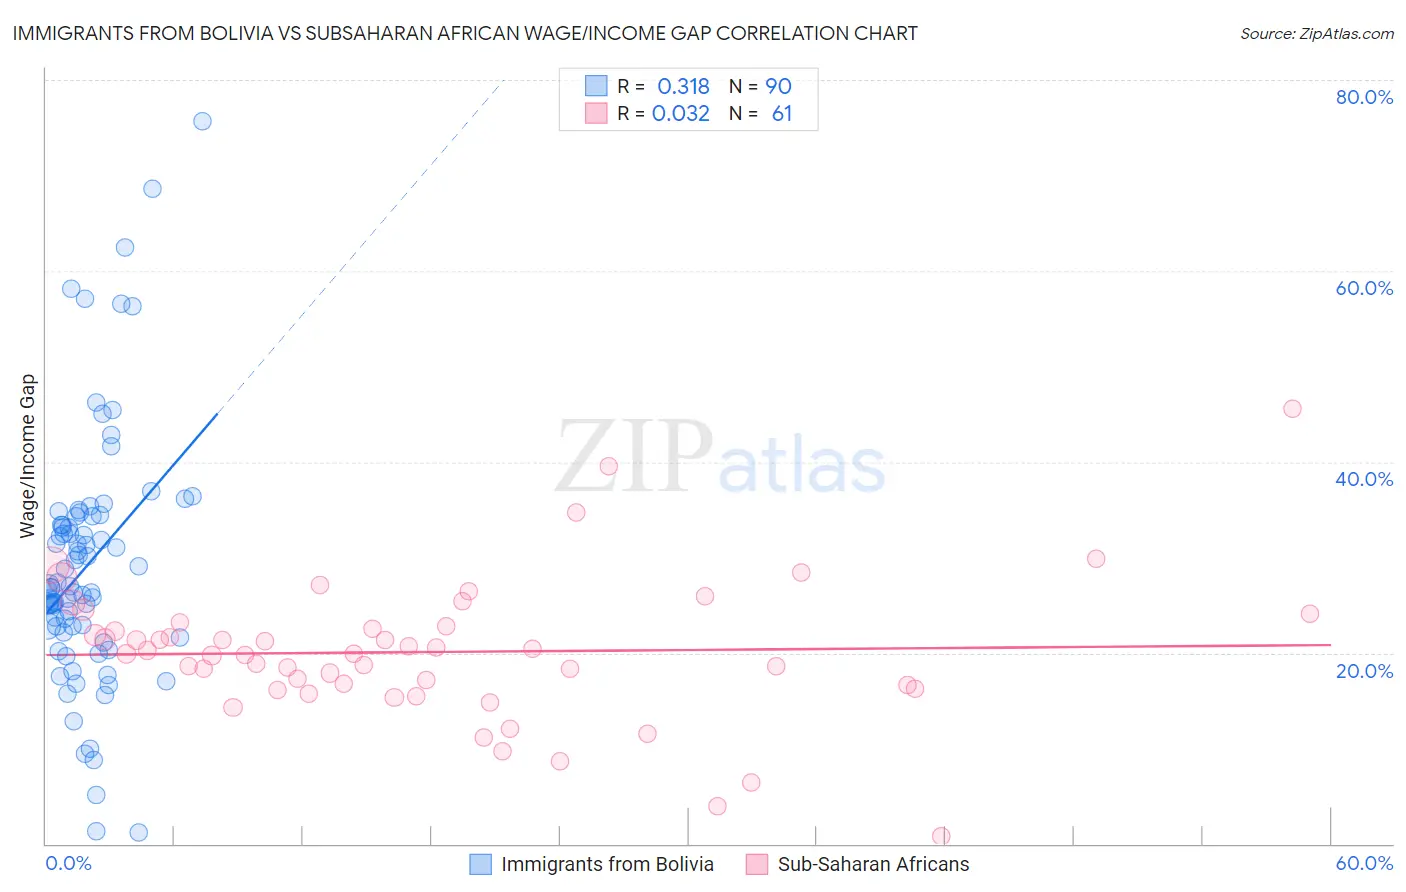 Immigrants from Bolivia vs Subsaharan African Wage/Income Gap